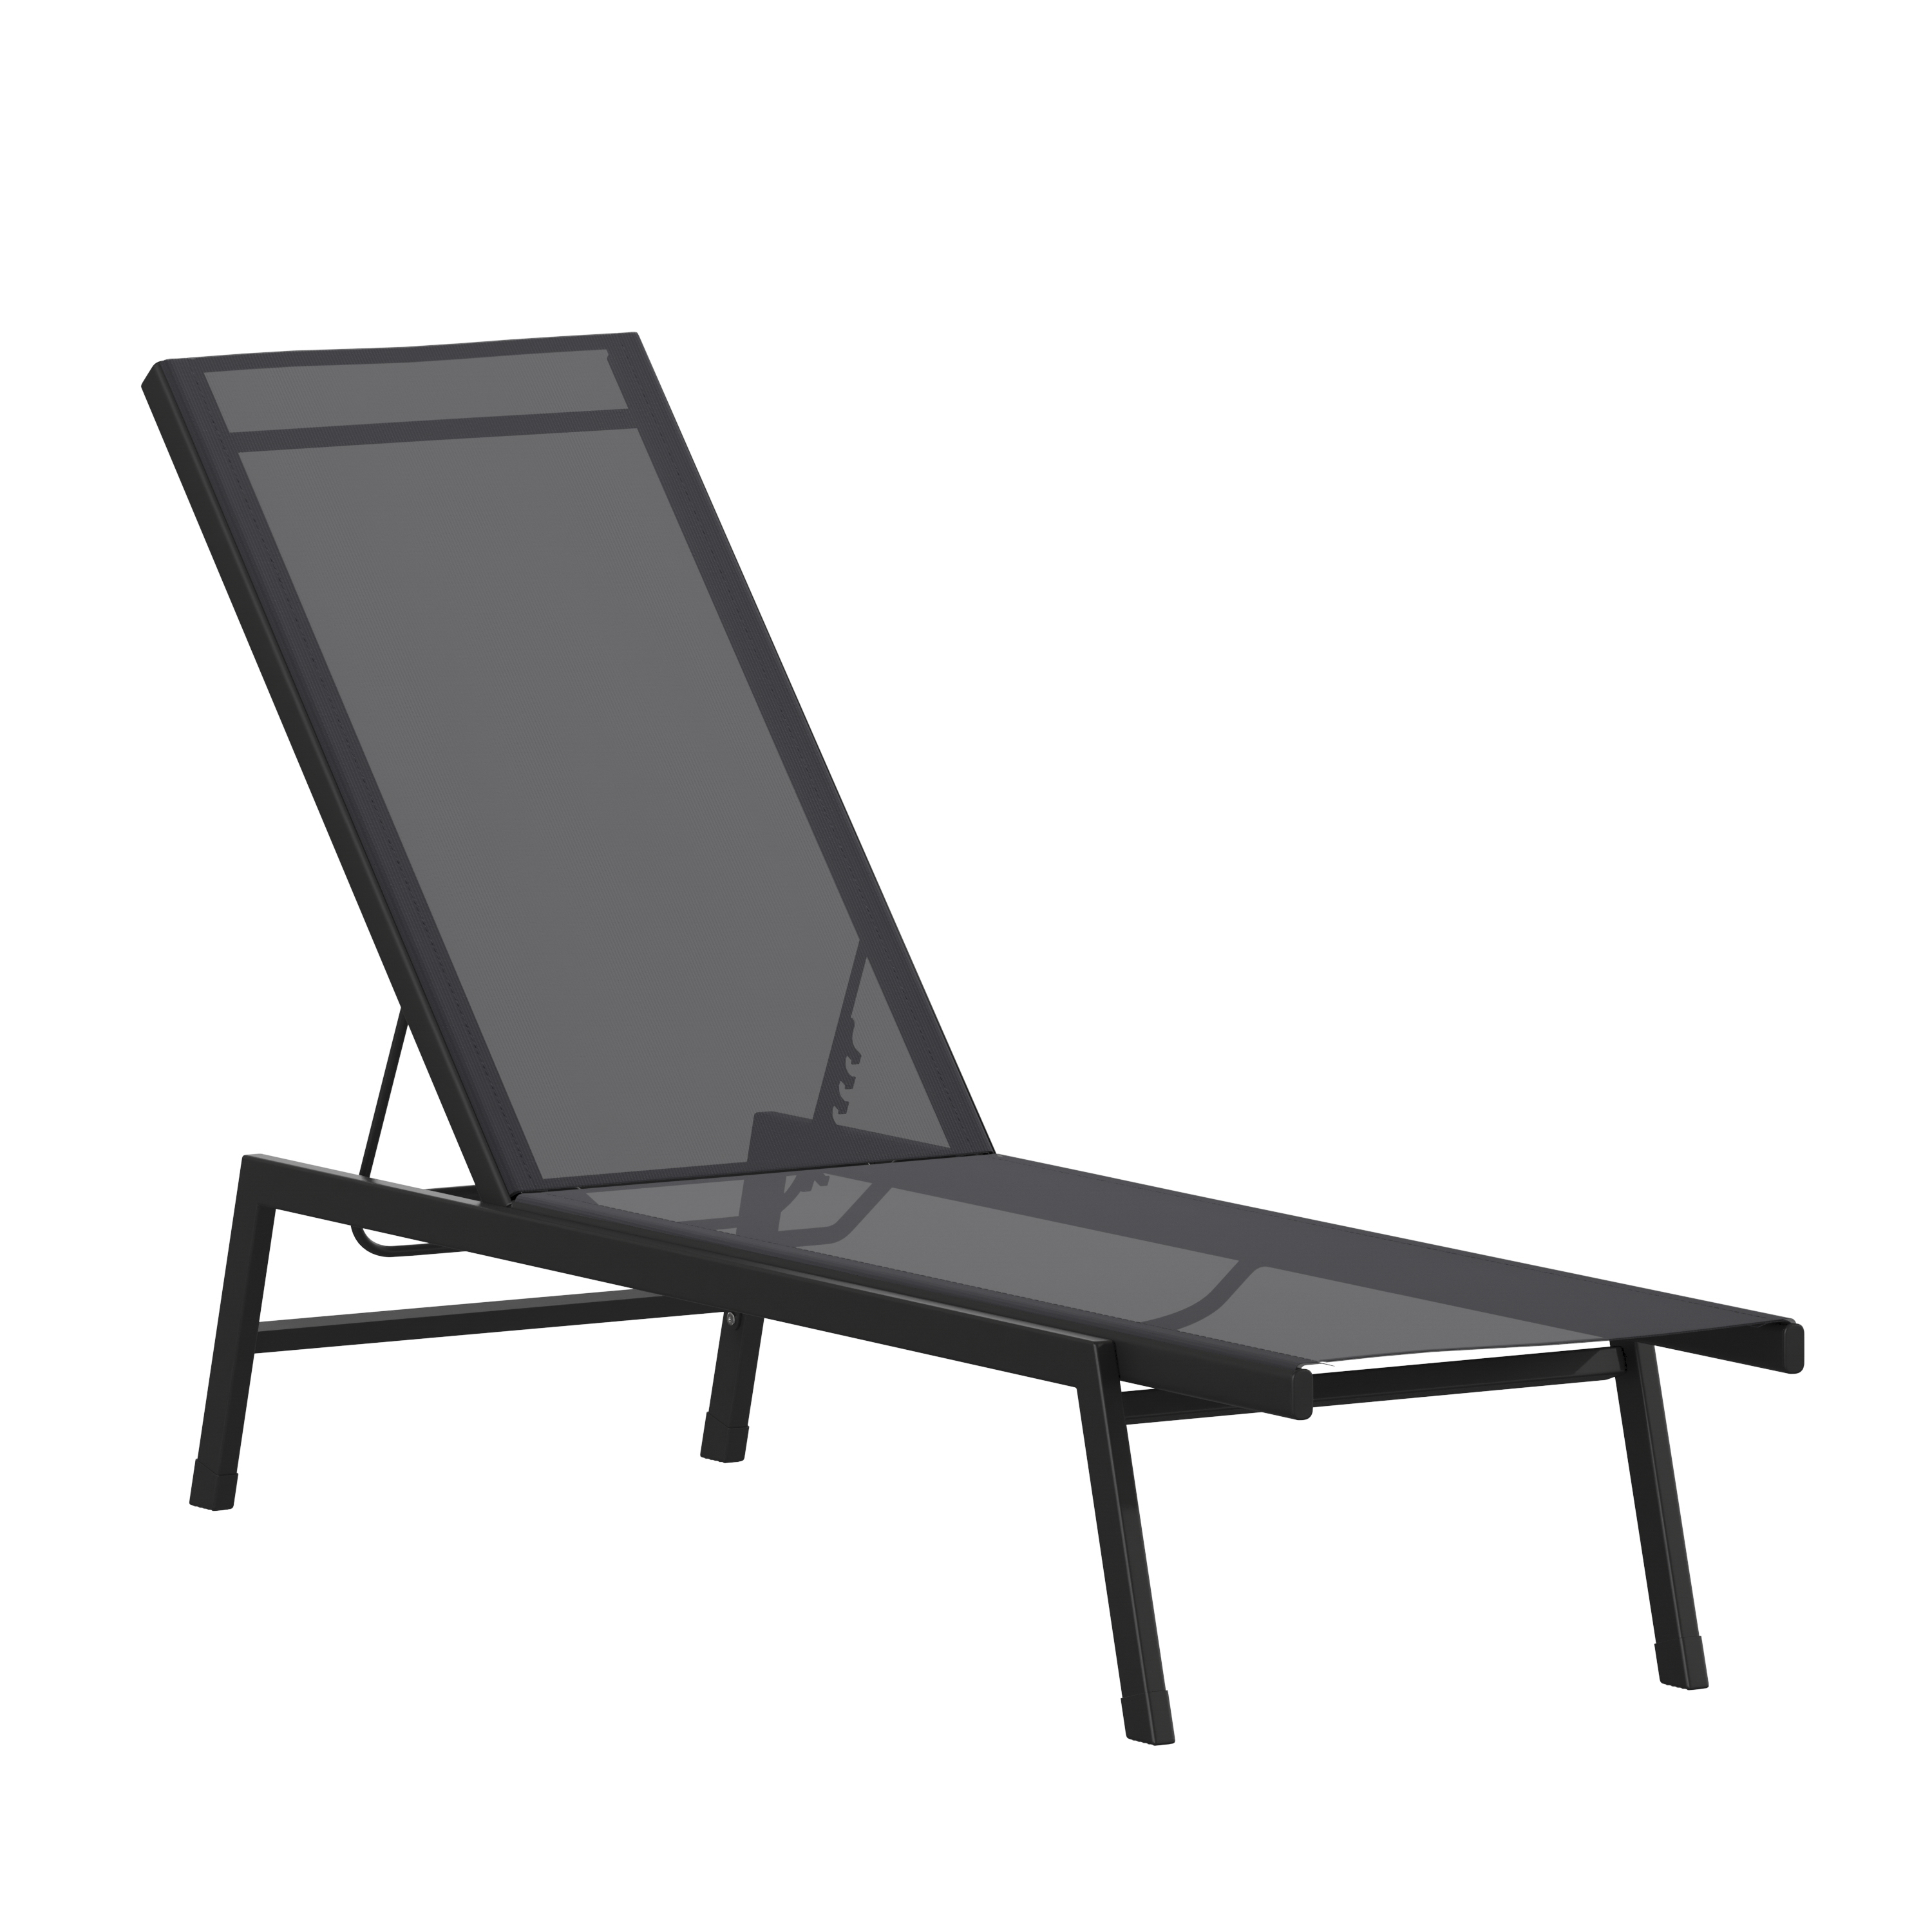 Flash Furniture JJ-LC326-BLK-BLK-GG All-Weather Adjustable Chaise Lounge Chair, Black/Black